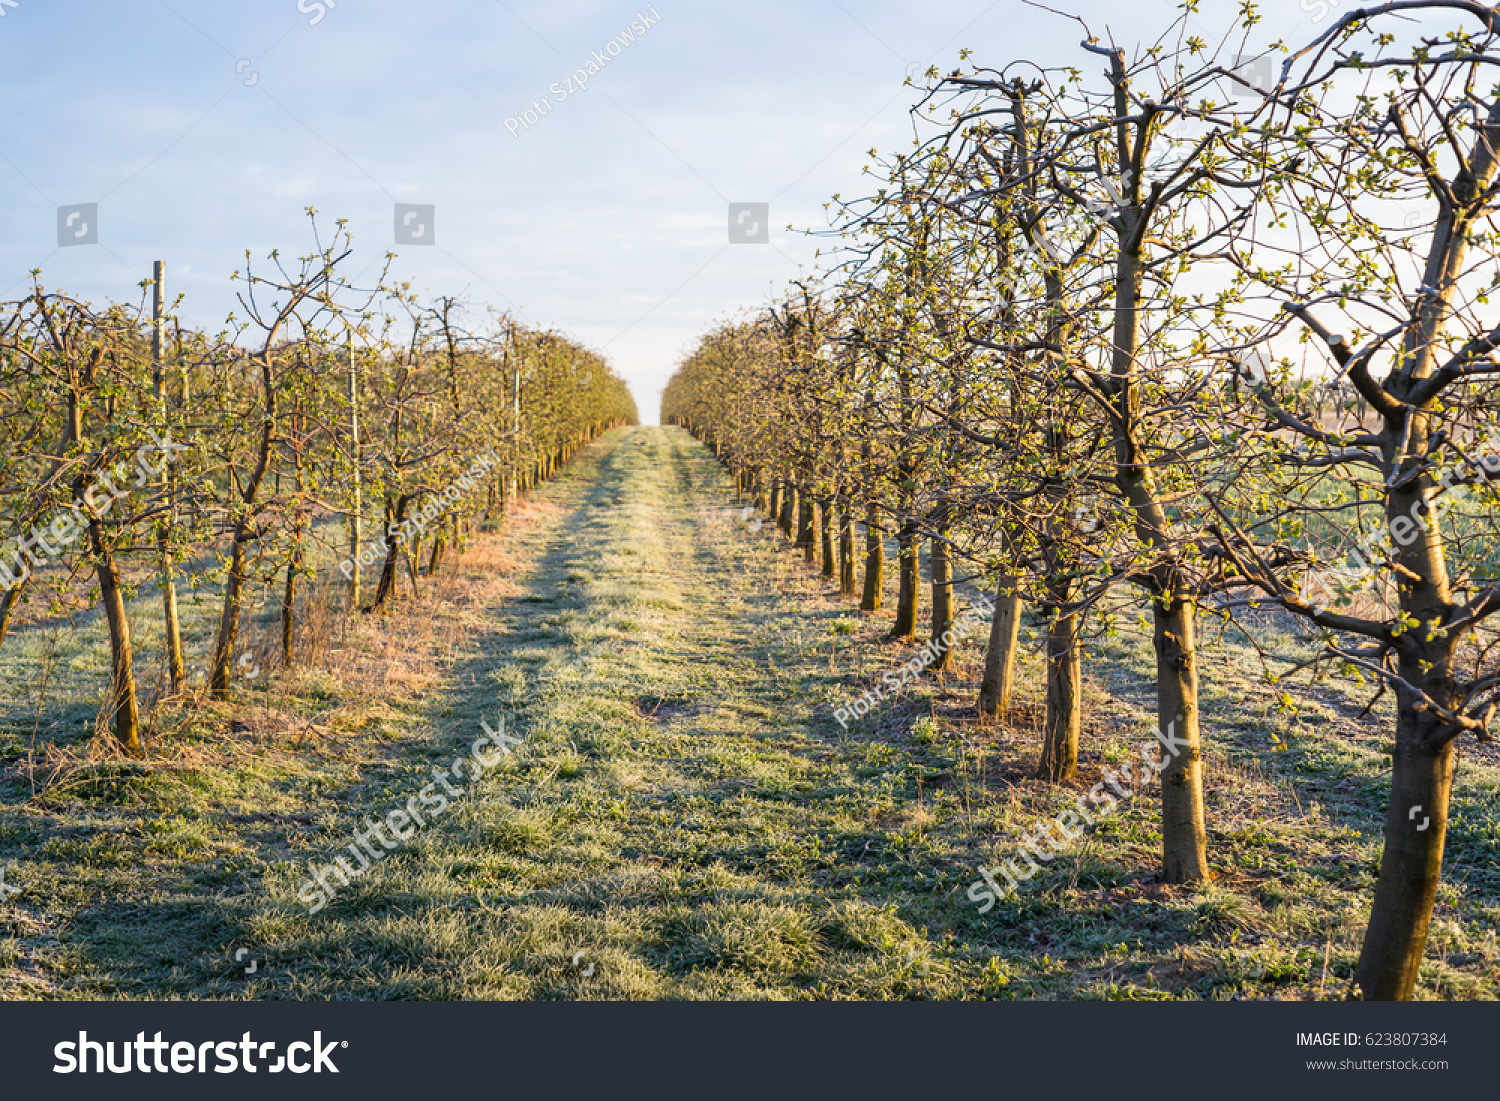 Orchard at the cold spring morning.  #623807384